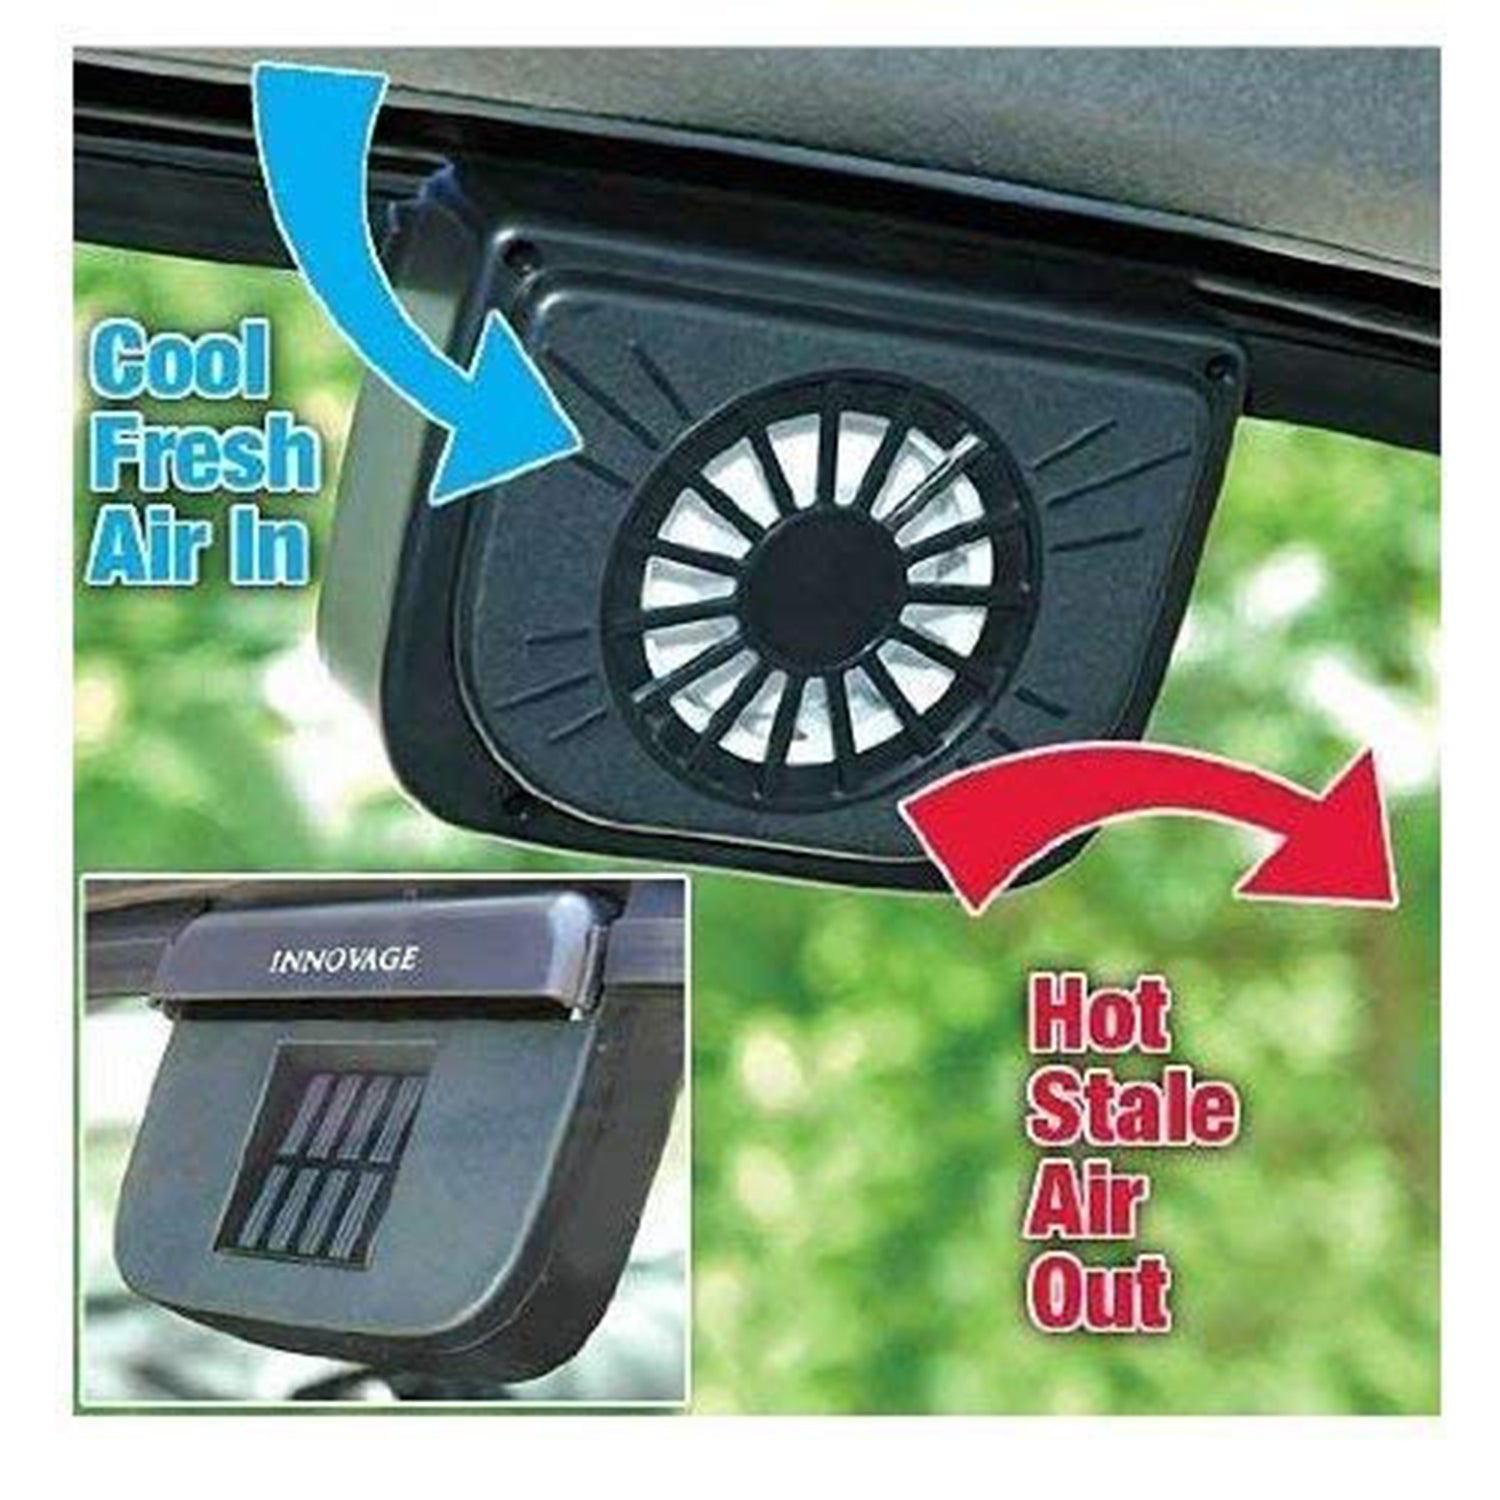 1460 Plastic Auto Cool- Solar Powered Ventilation Fan Keeps Your Parked Car Cool 